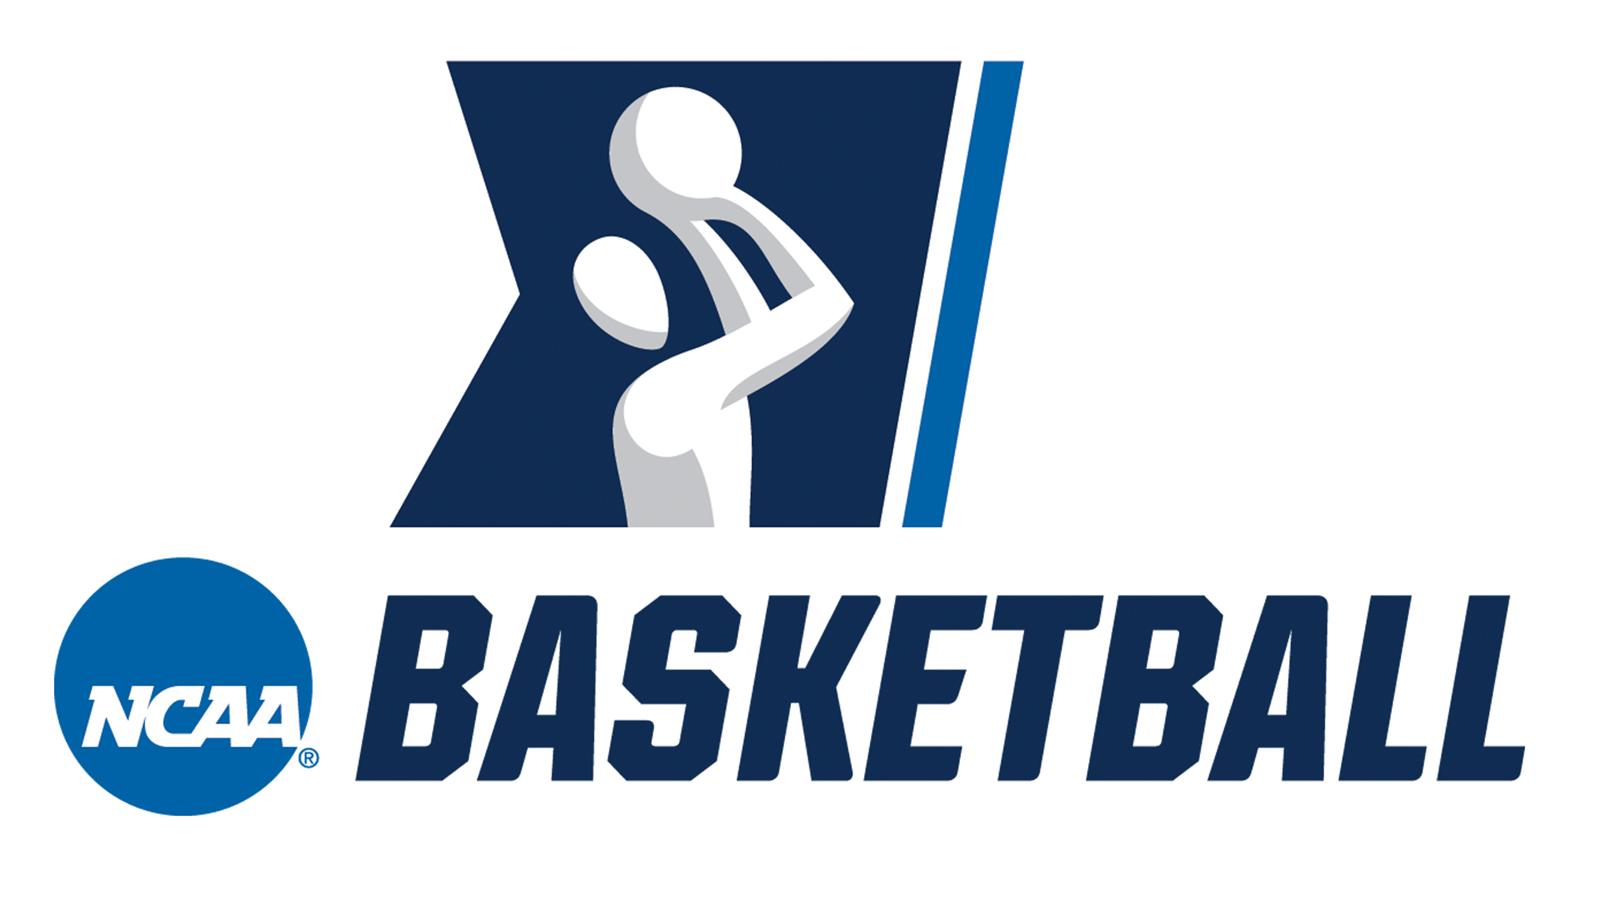 NCAA Men's Basketball Tournament: East Regional - Session 2 [CANCELLED] at Madison Square Garden